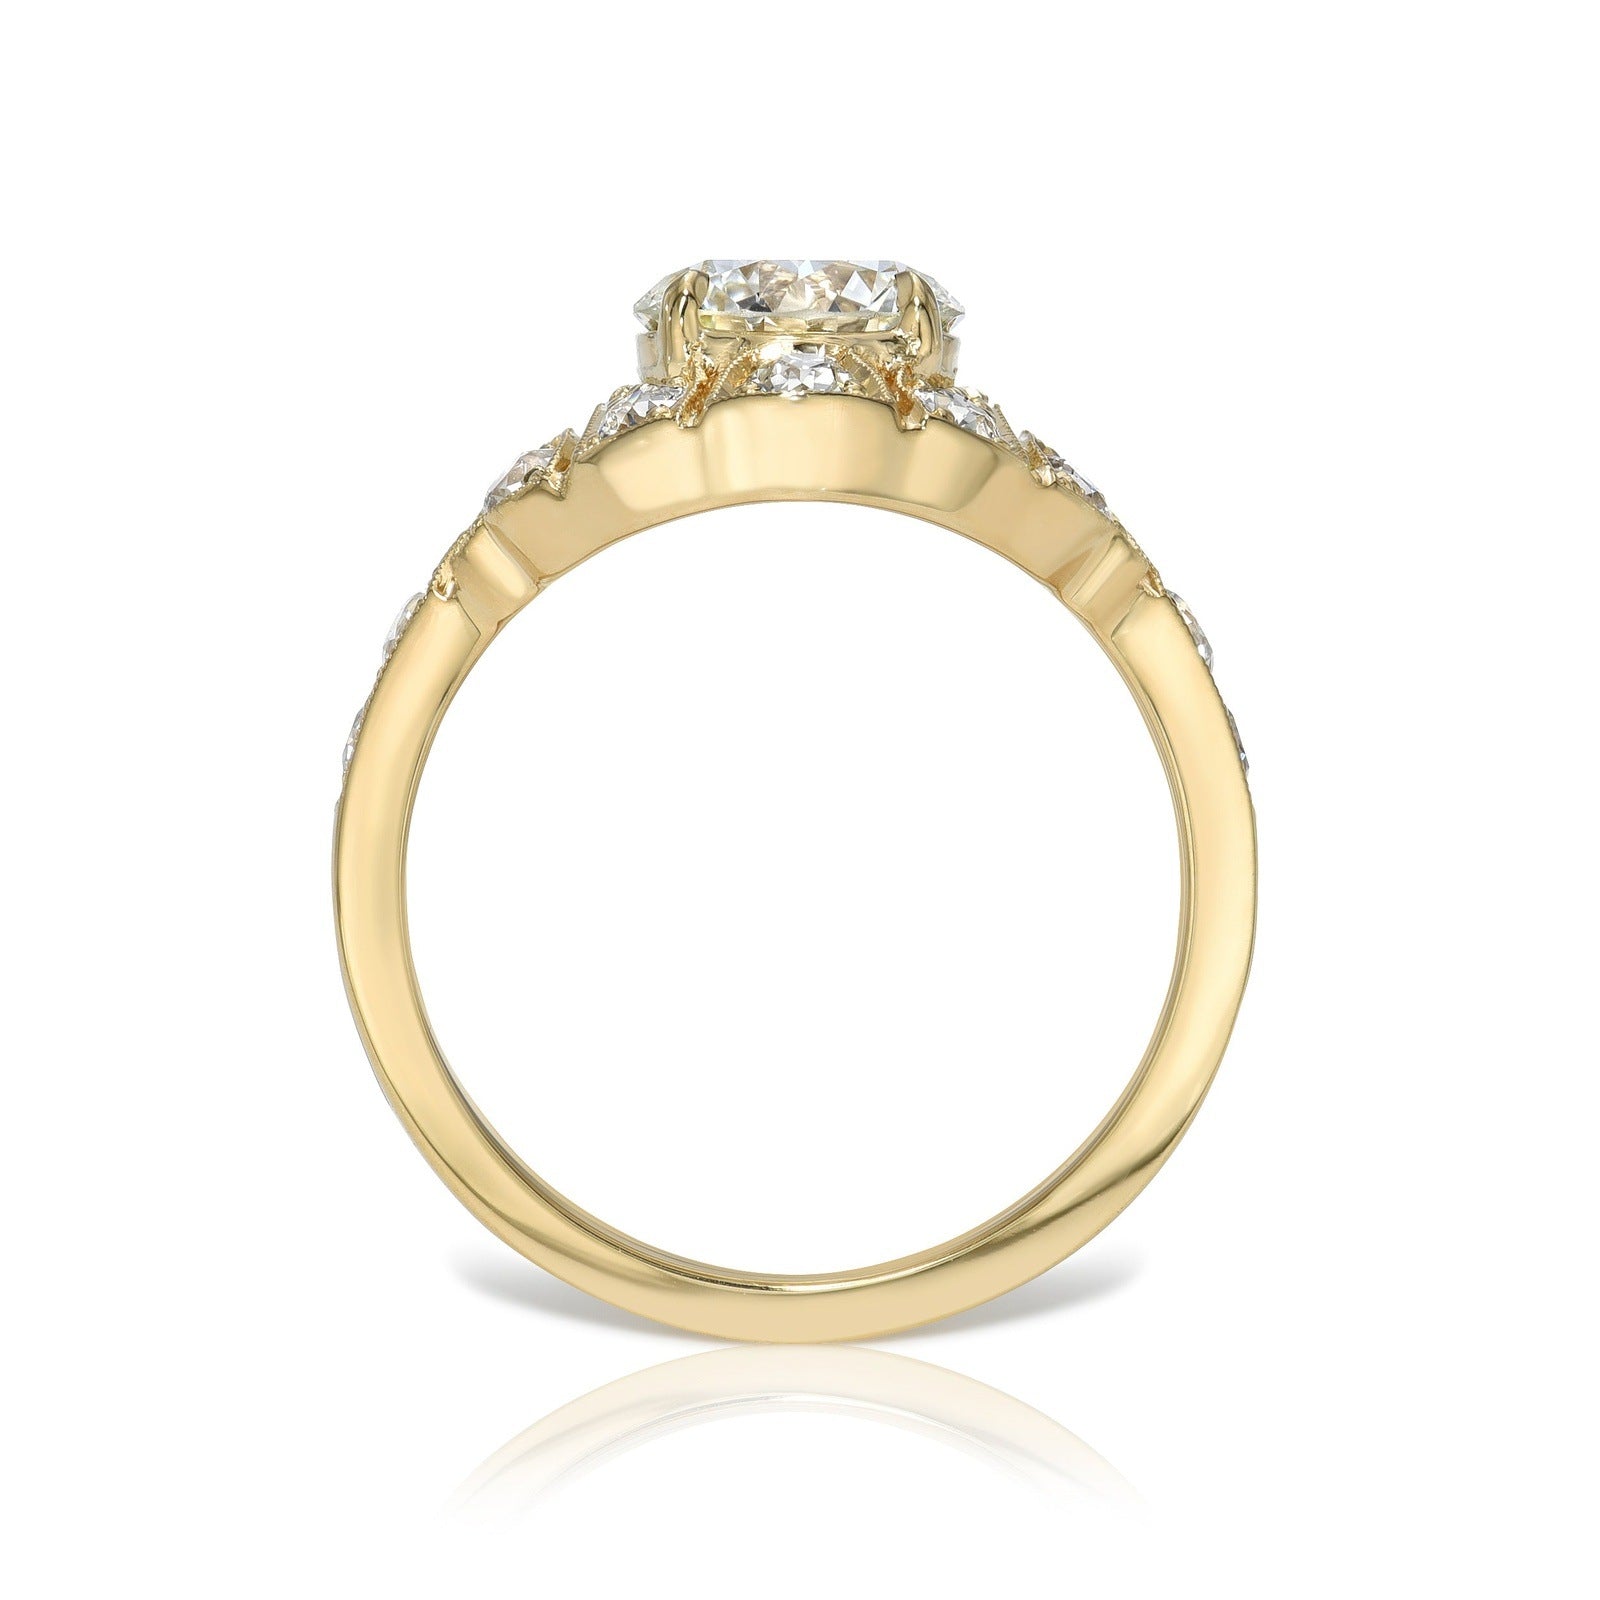 SINGLE STONE RENEE RING featuring 1.33ct H/VS1 GIA certified transitional cut diamond prong set with 0.78ctw old European cut accent diamonds set in a handcrafted 18K yellow gold mounting.